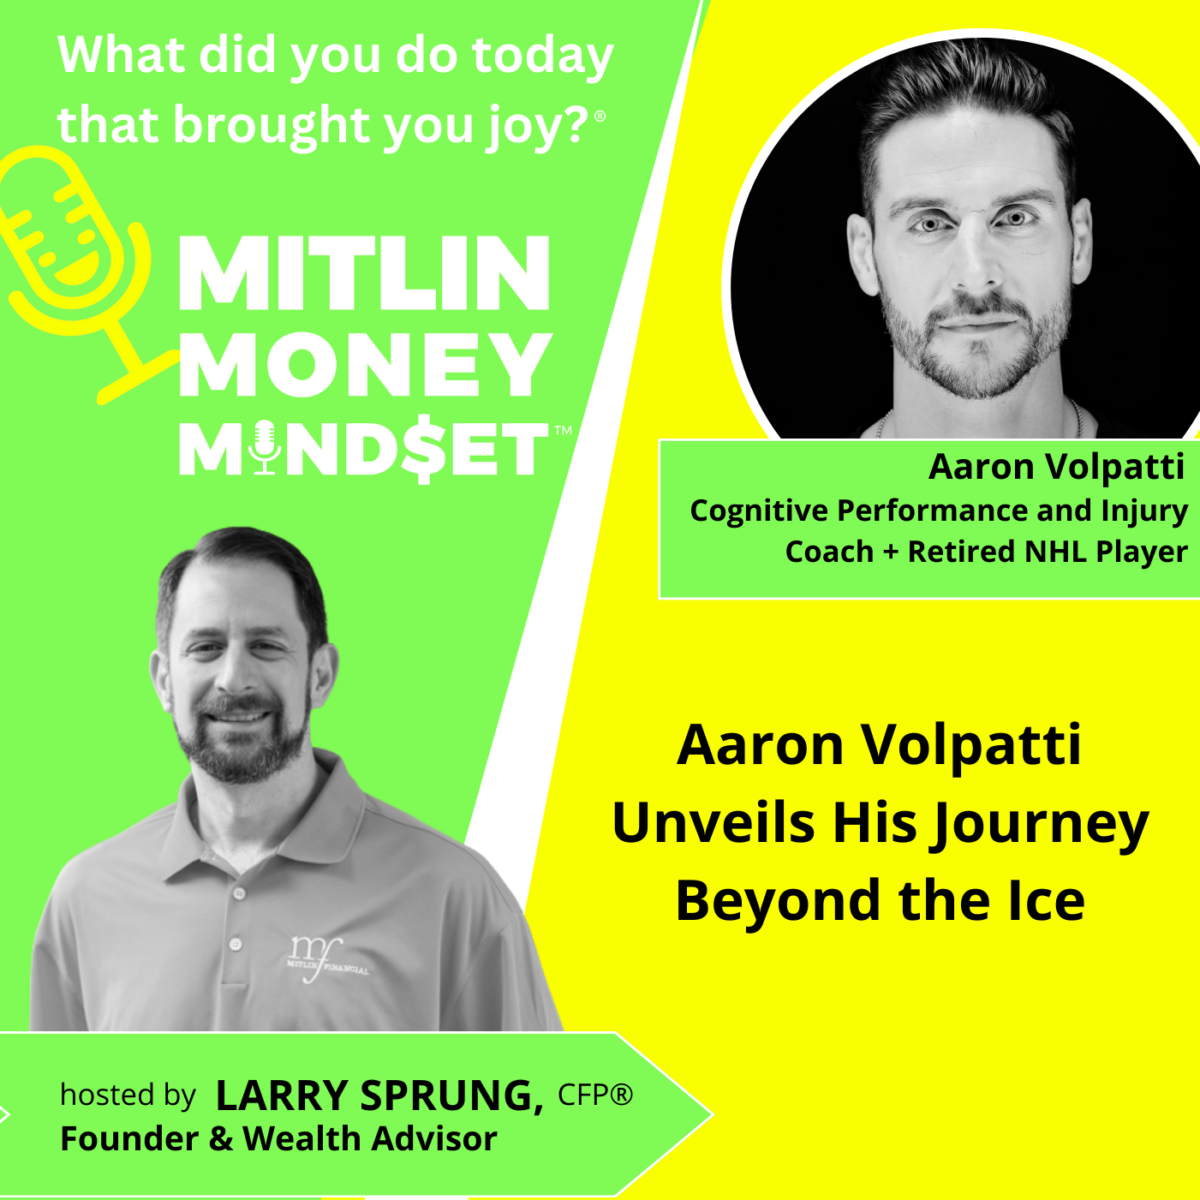 Aaron Volpatti Unveils His Journey Beyond the Ice, Episode #181